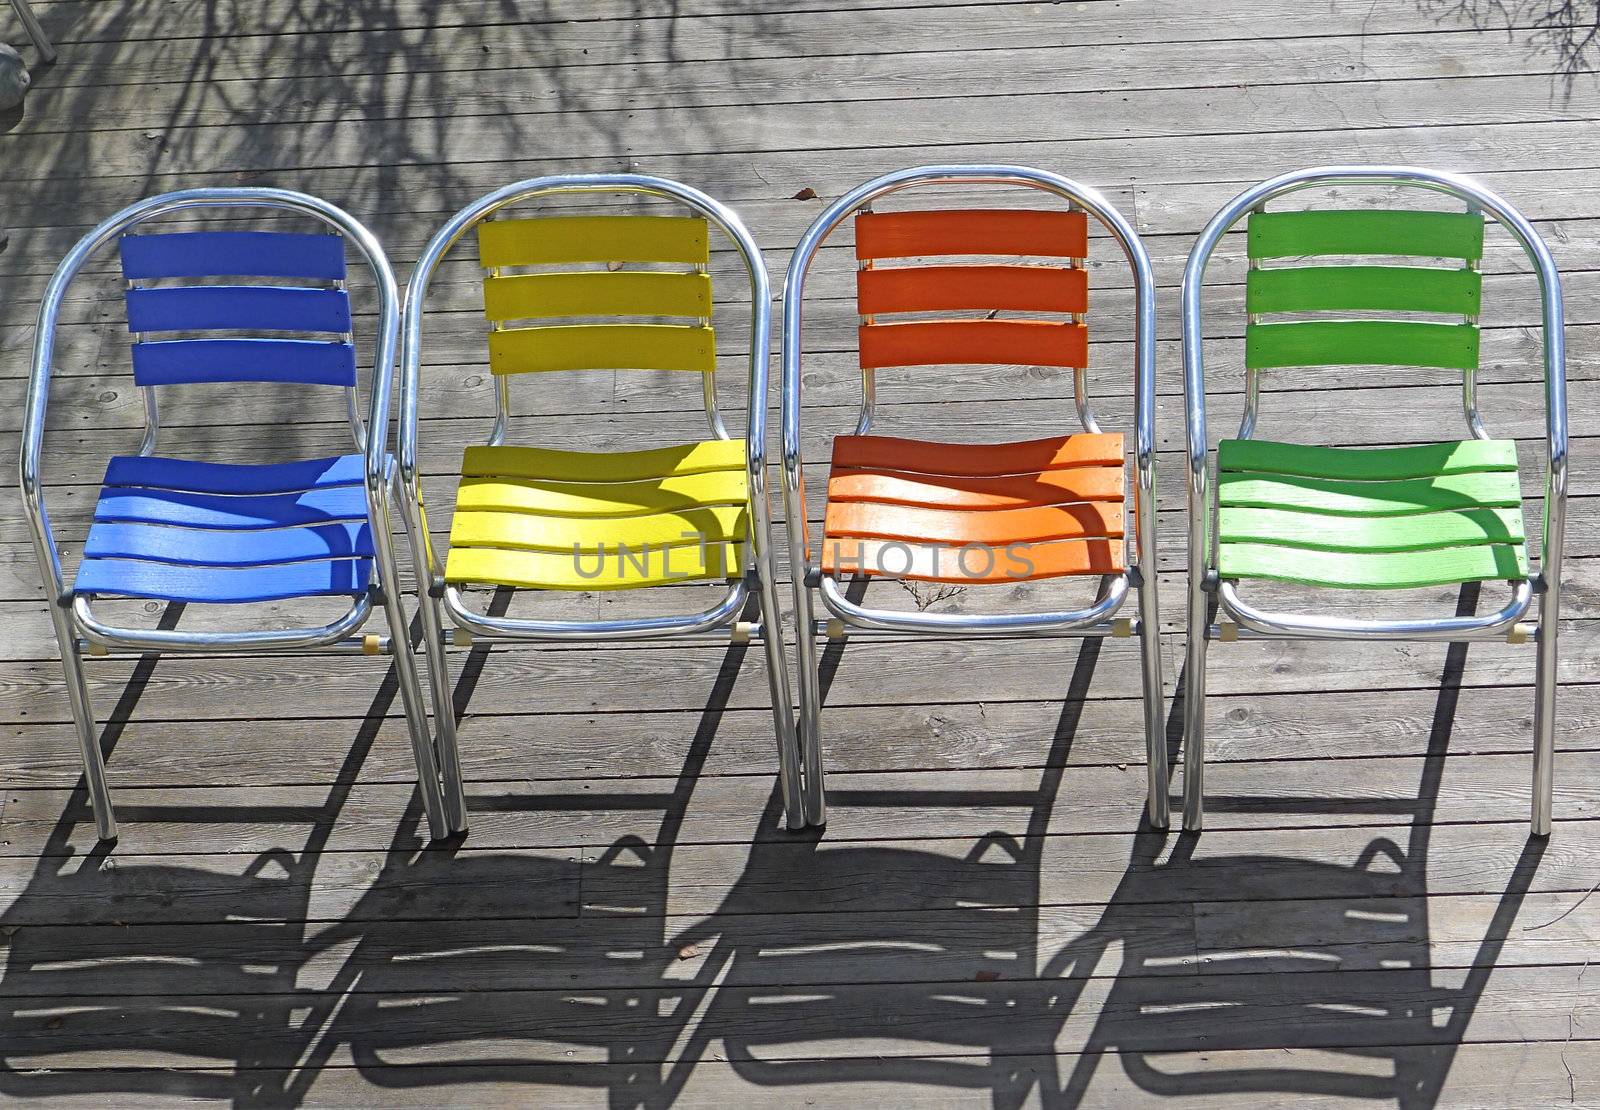 Colored chairs by Bildehagen